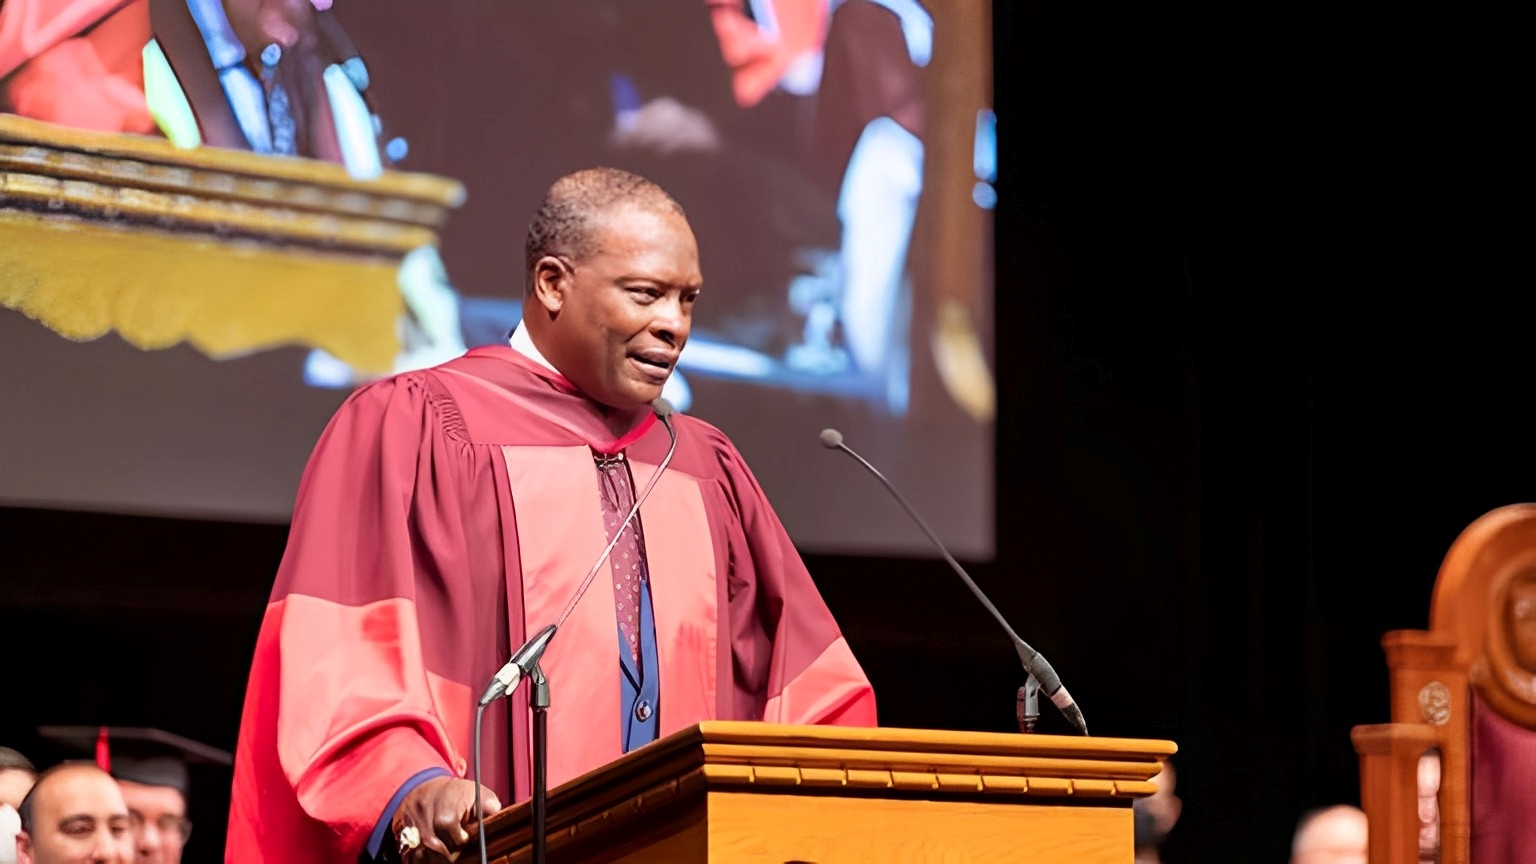 Brian Warren delivers his inspiring speech at the 2022 McMaster Engineering convocation.